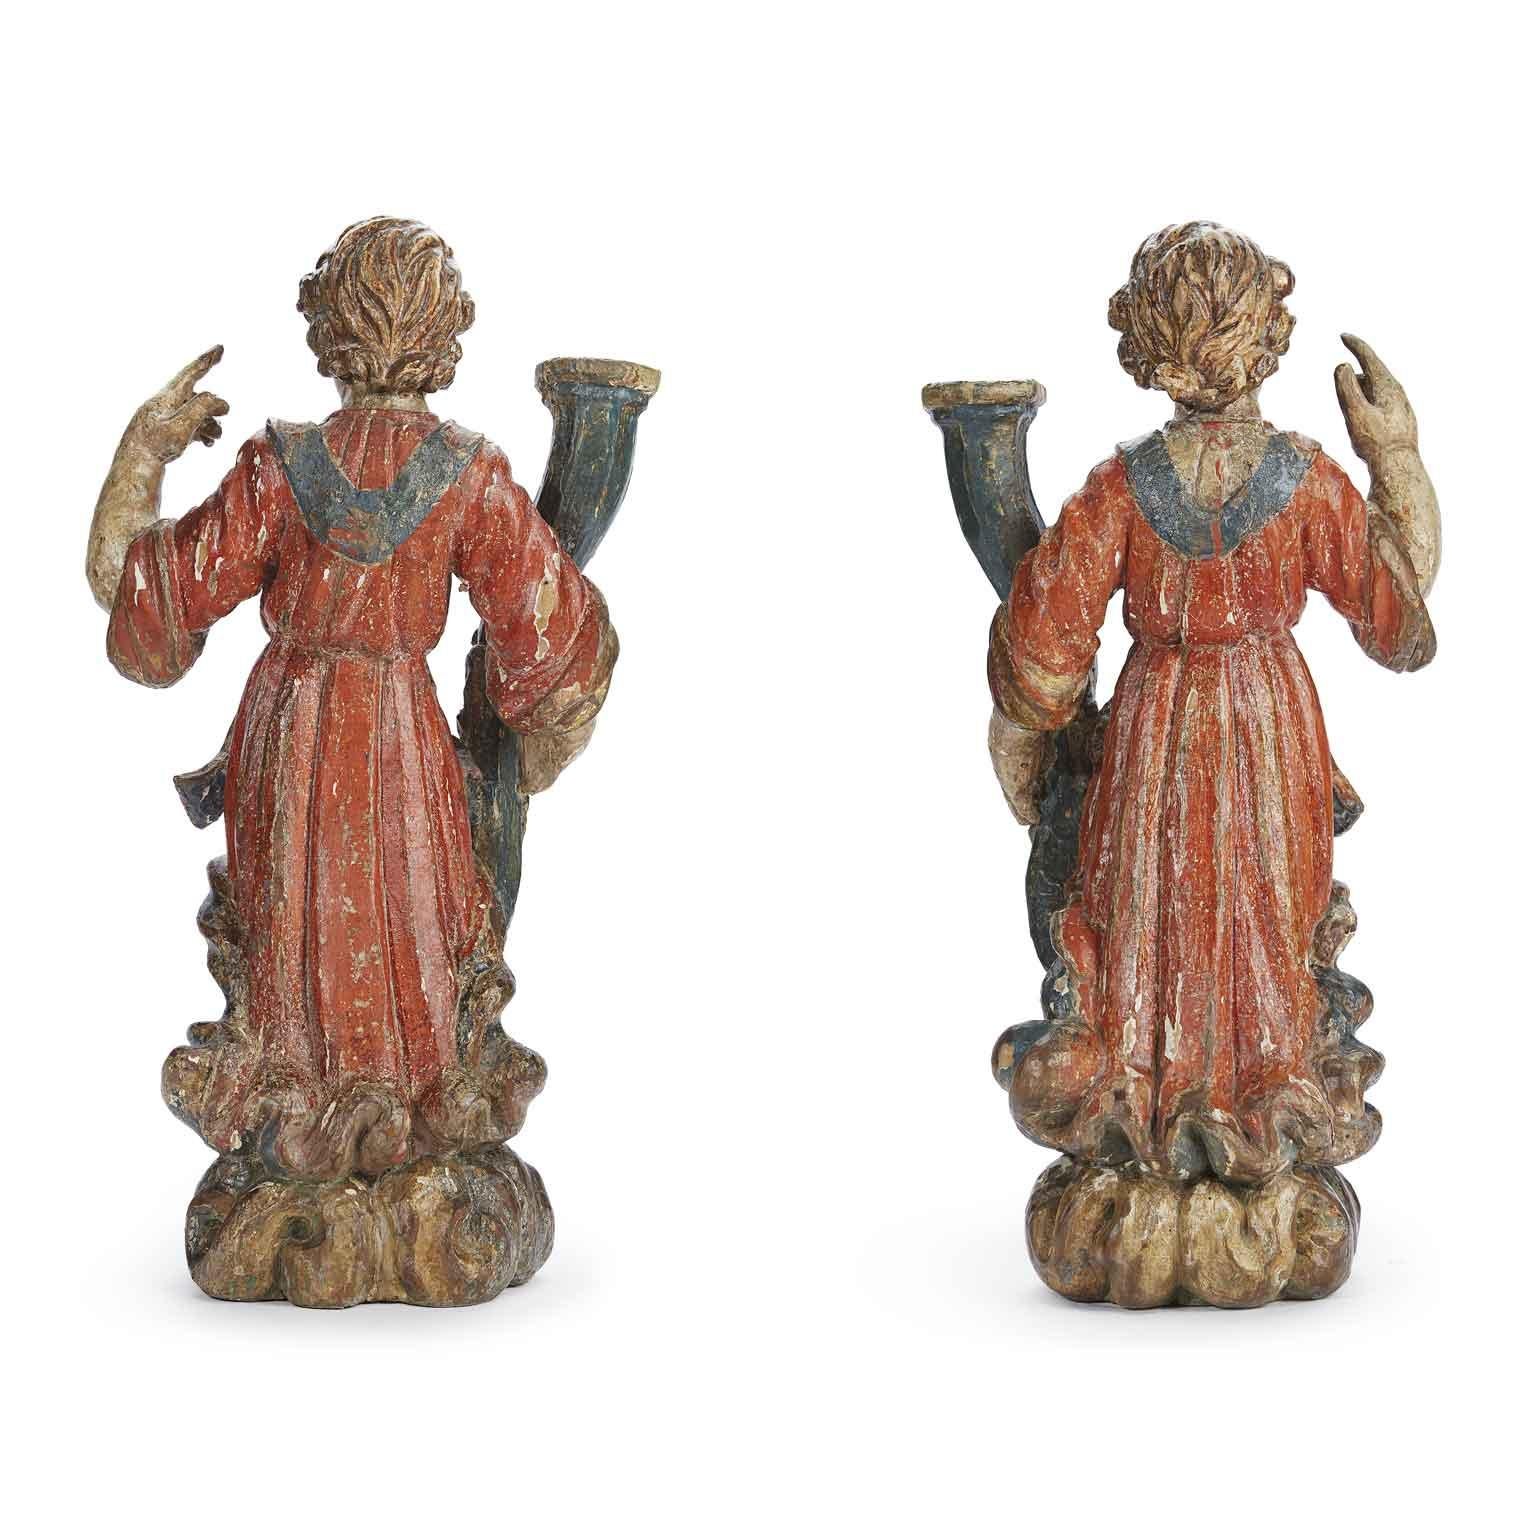 Baroque Pair of Carved Lacquered and Gilded Candle Holder Angels Italian Sculptures 1650s For Sale